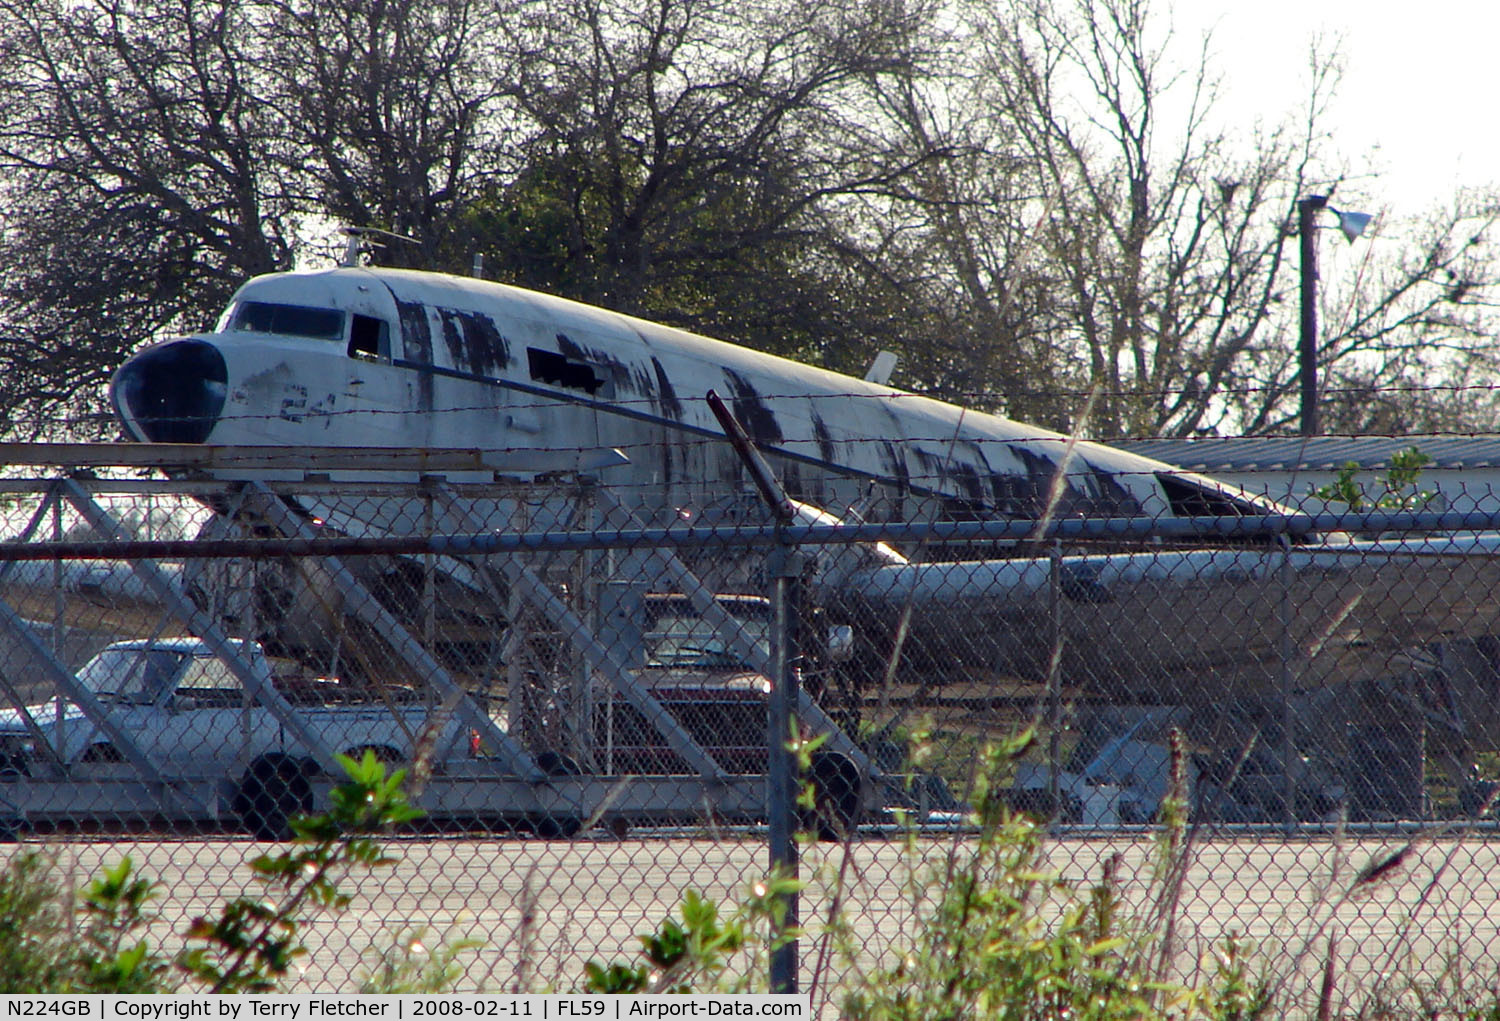 N224GB, 1944 Douglas DC3C 1830-94 C/N 12261, Now looking the worse for wear and used as a source of Spares